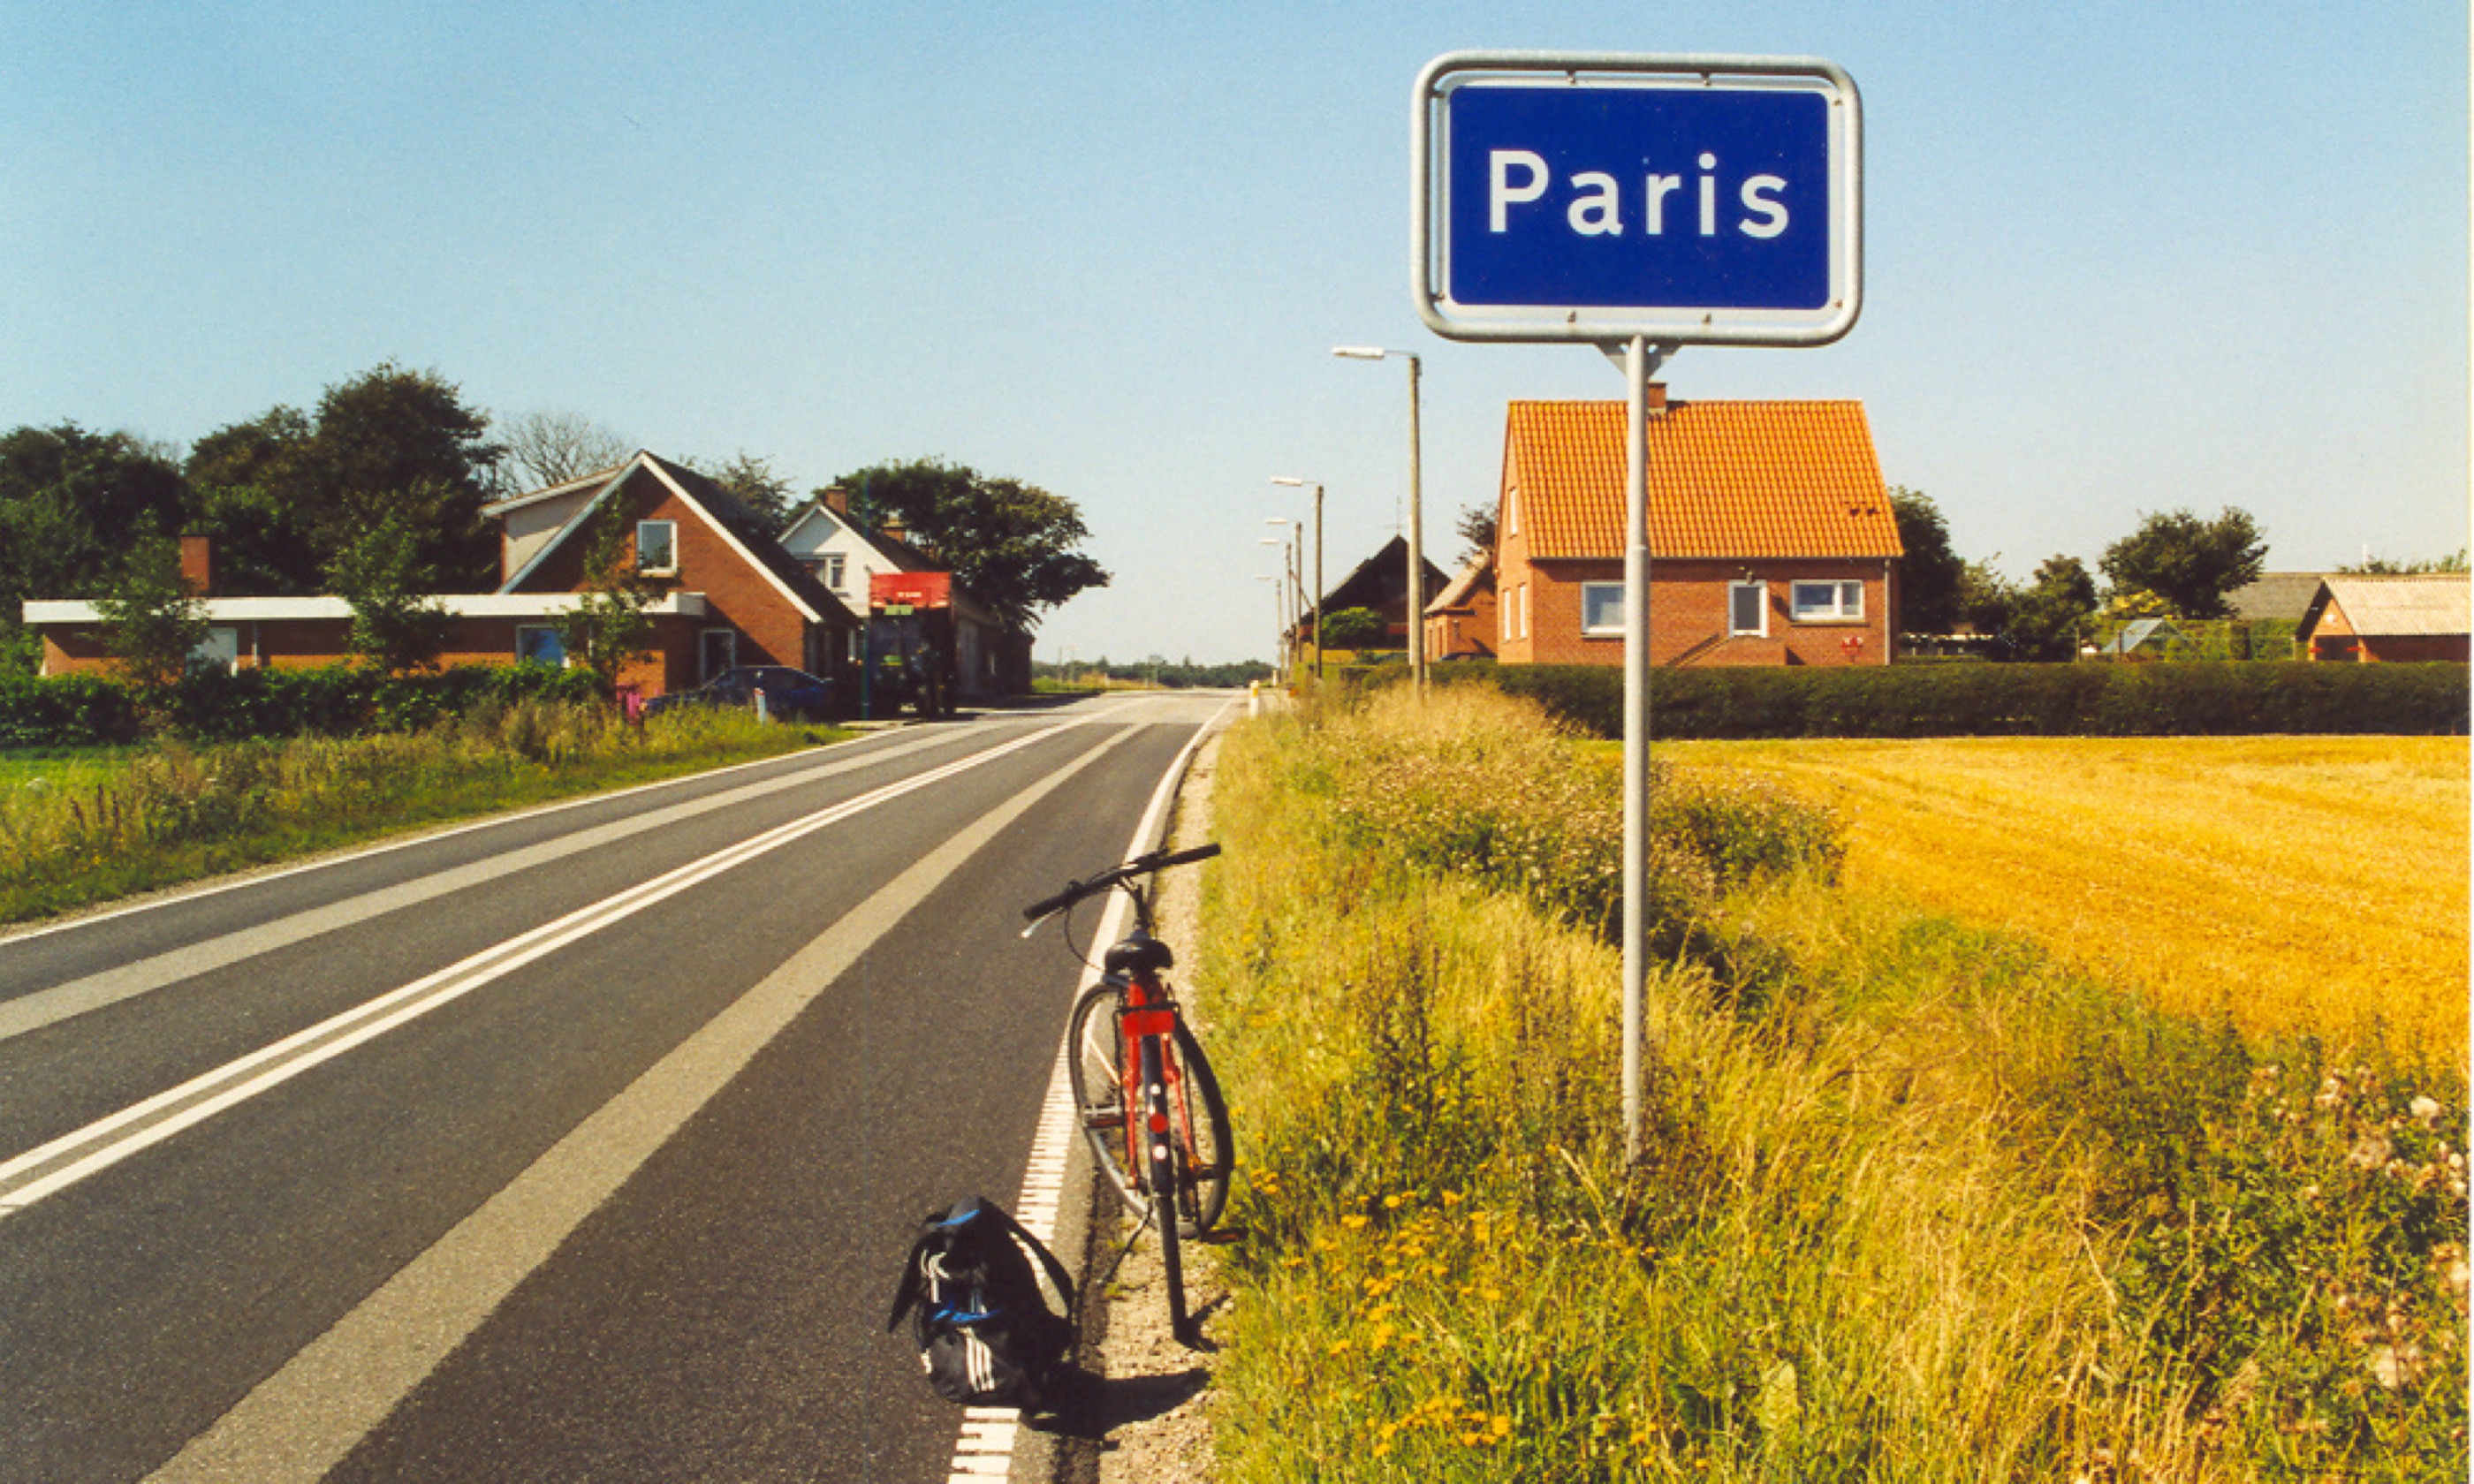 The outskirts of Paris, Denmark (Creative Commons: Olaf Just)